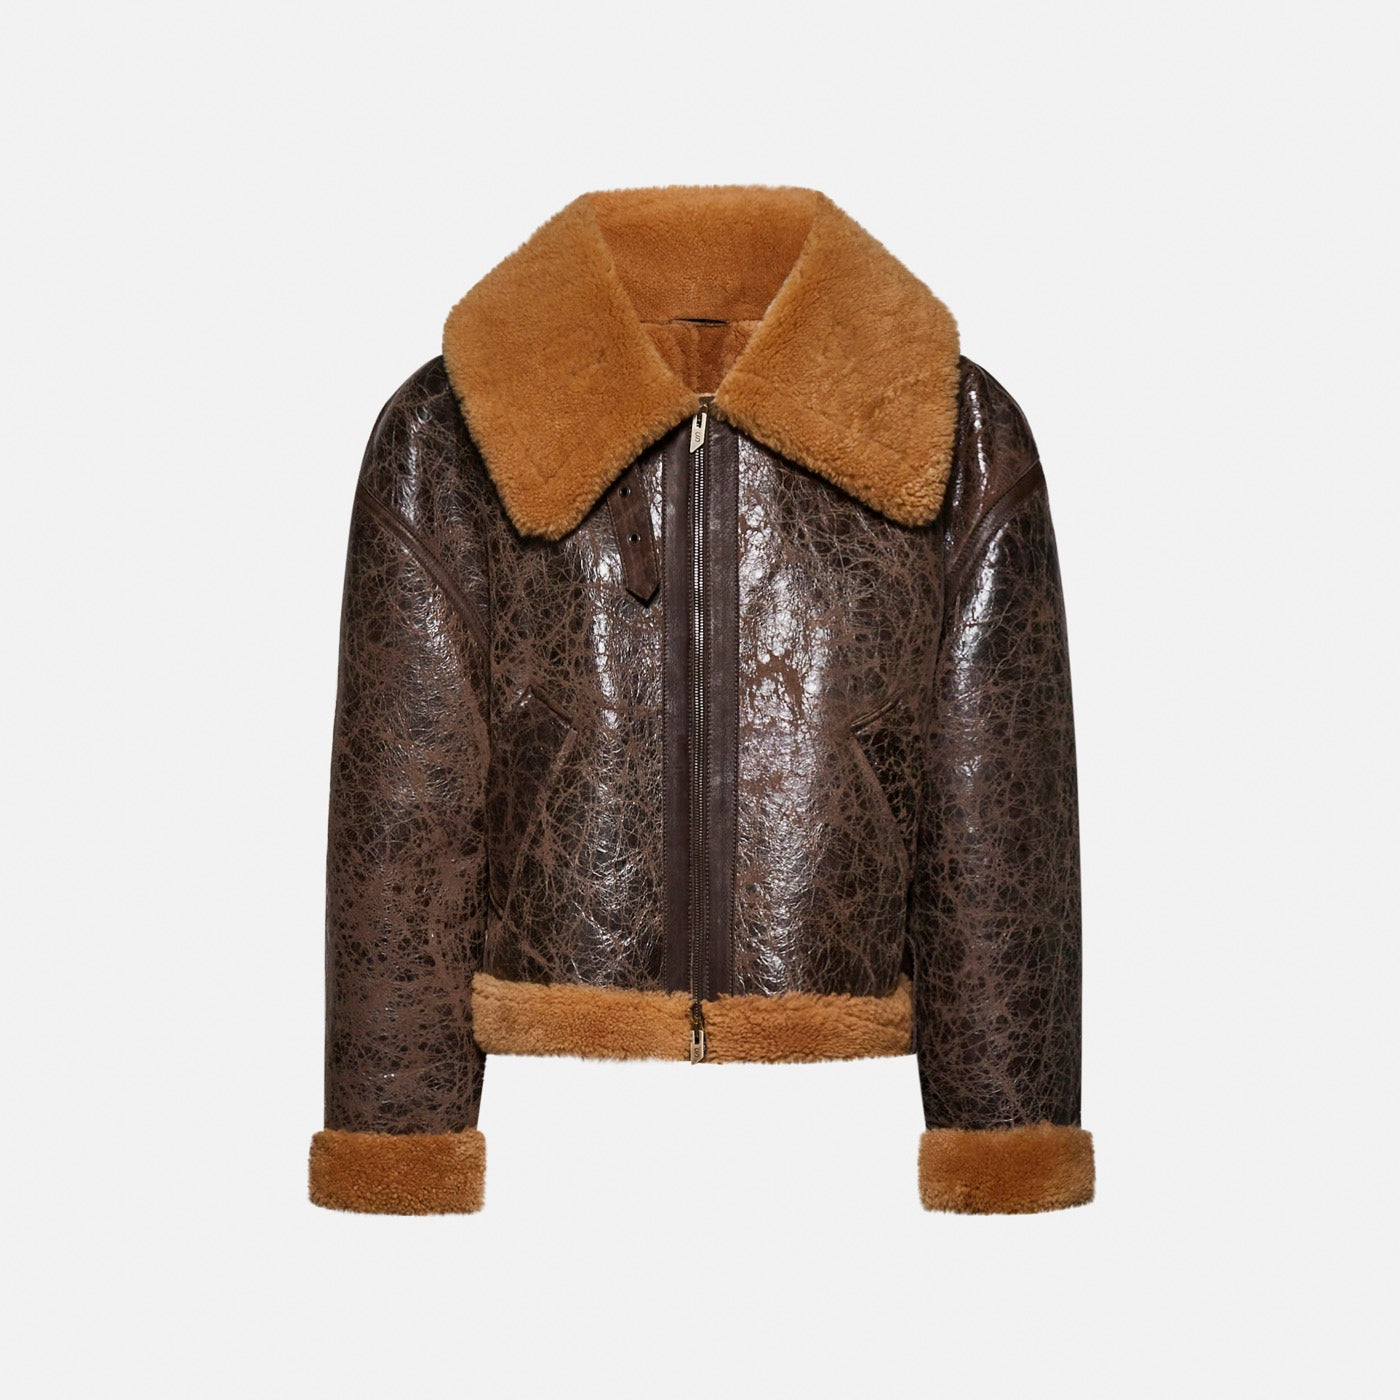 GIACCA IN SHEARLING - BROWN